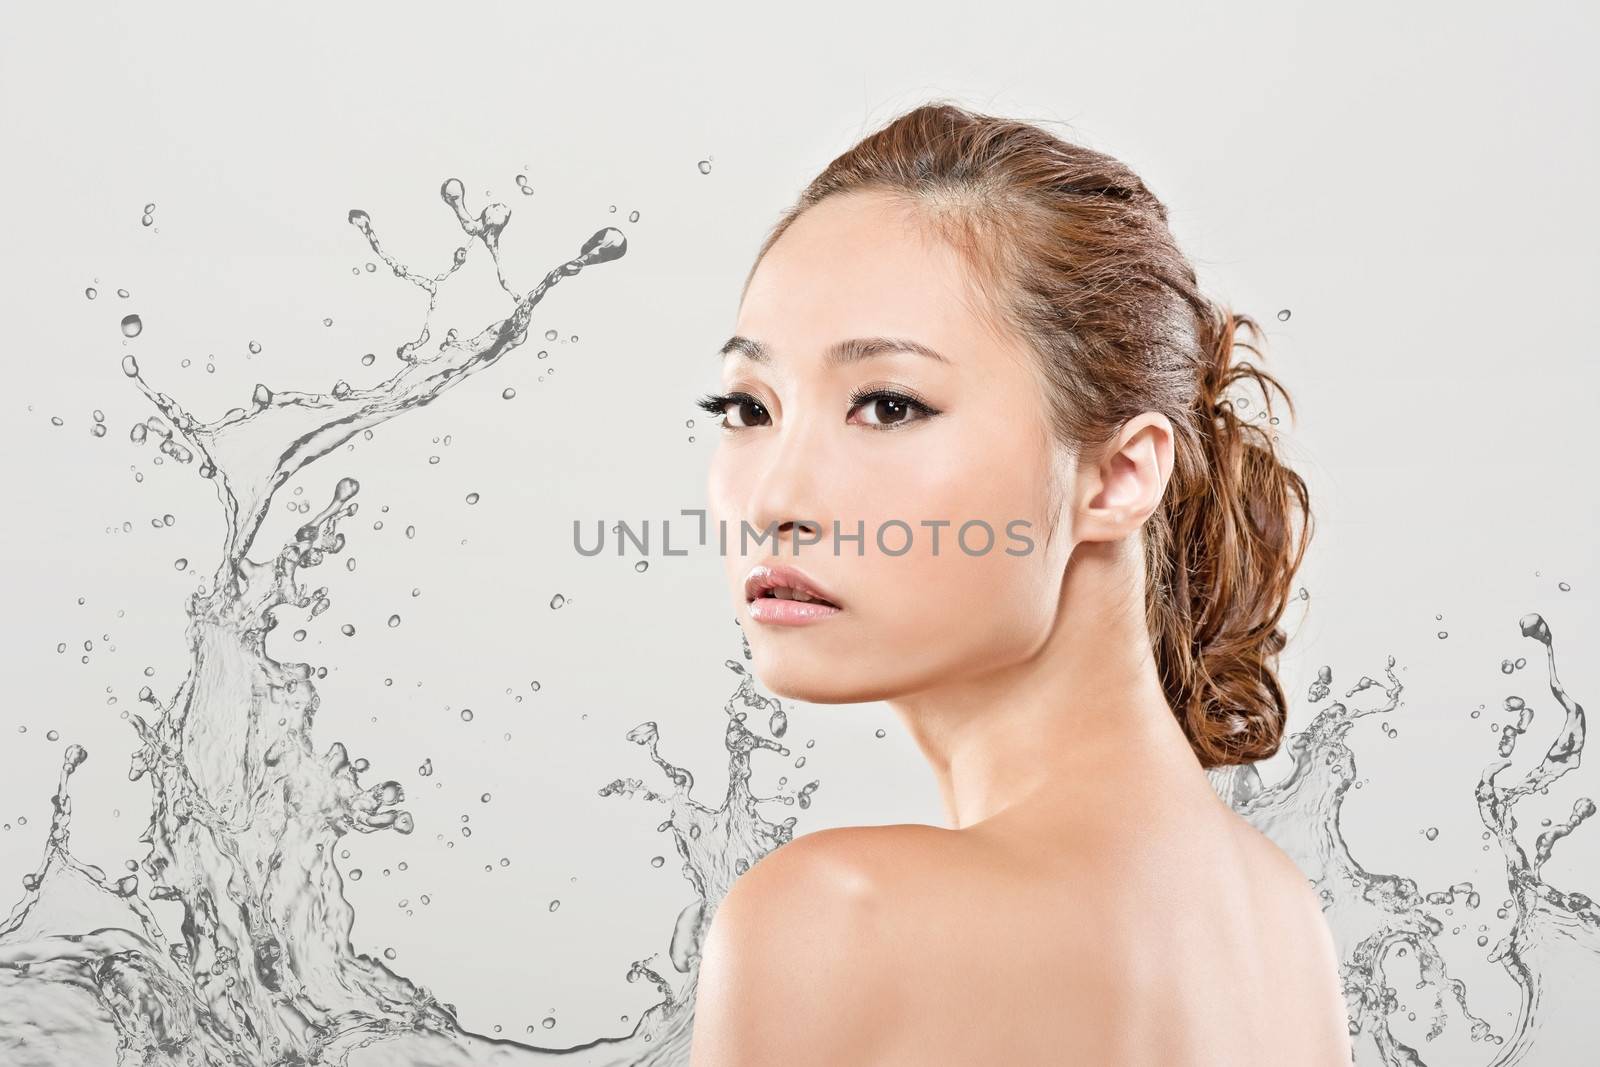 Asian beauty face with water, closeup portrait with clean and fresh elegant lady.